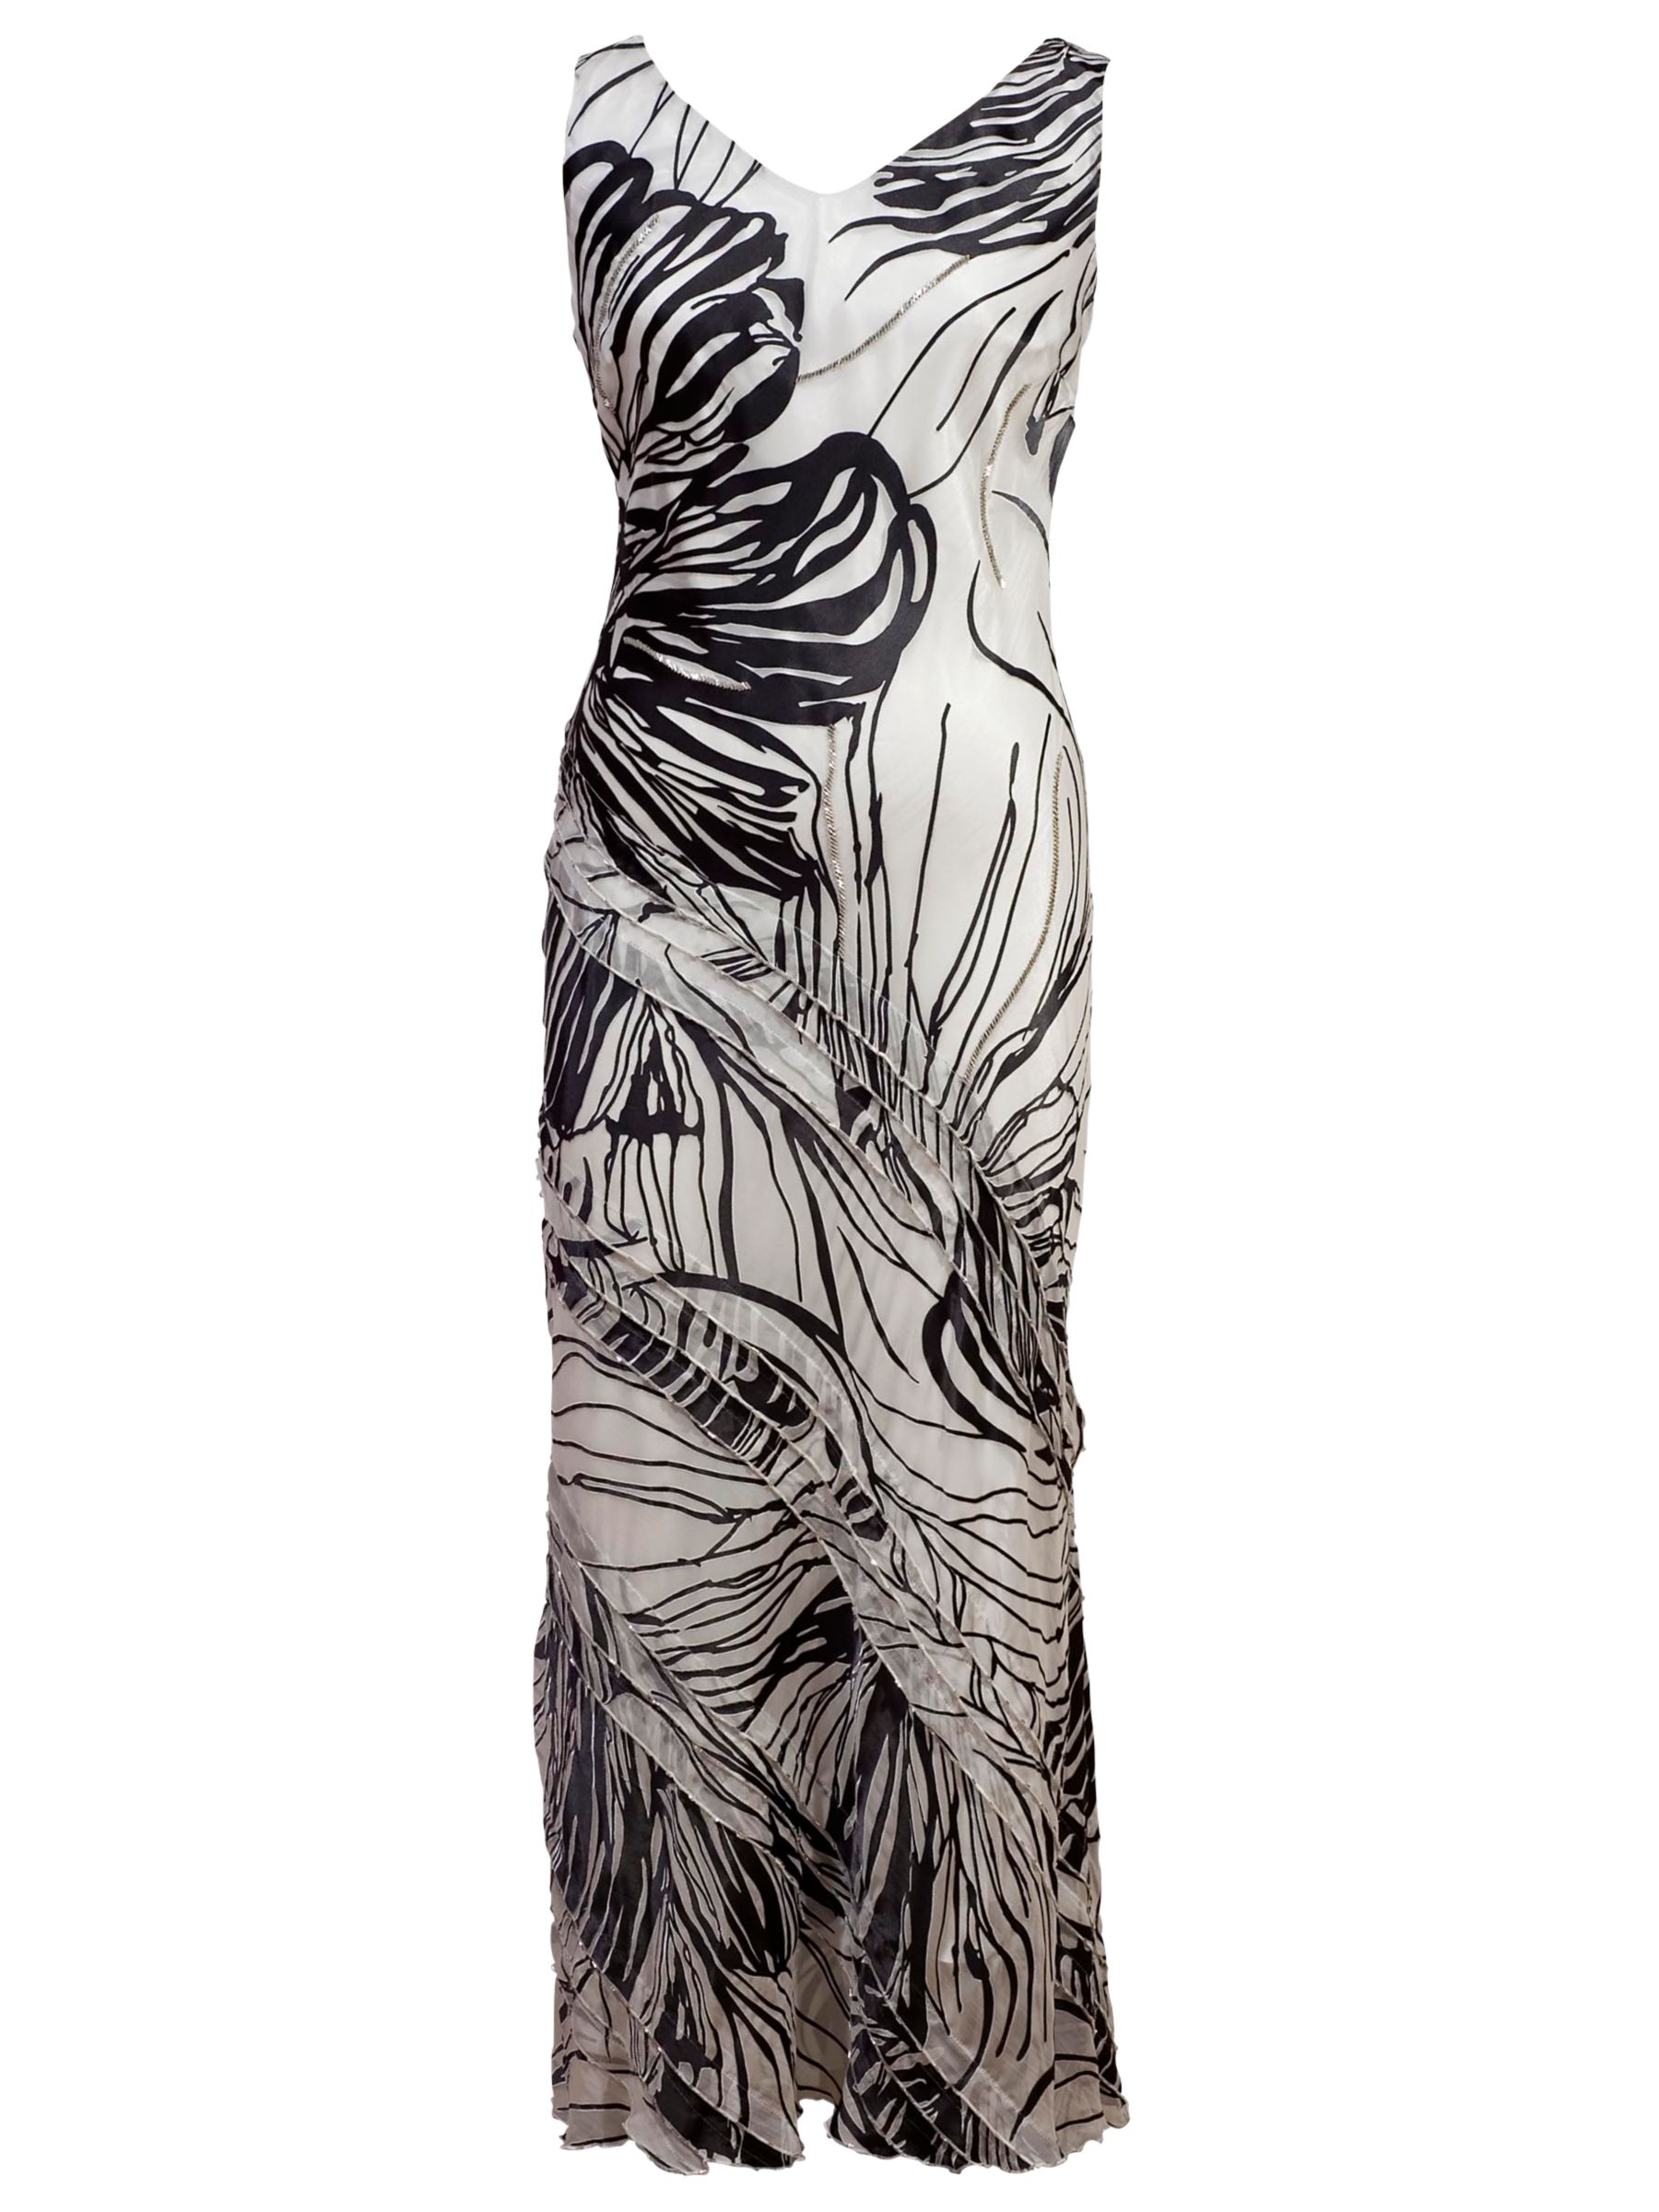 Chesca Abstract Floral Cinderella Dress, Ivory/Black at JohnLewis